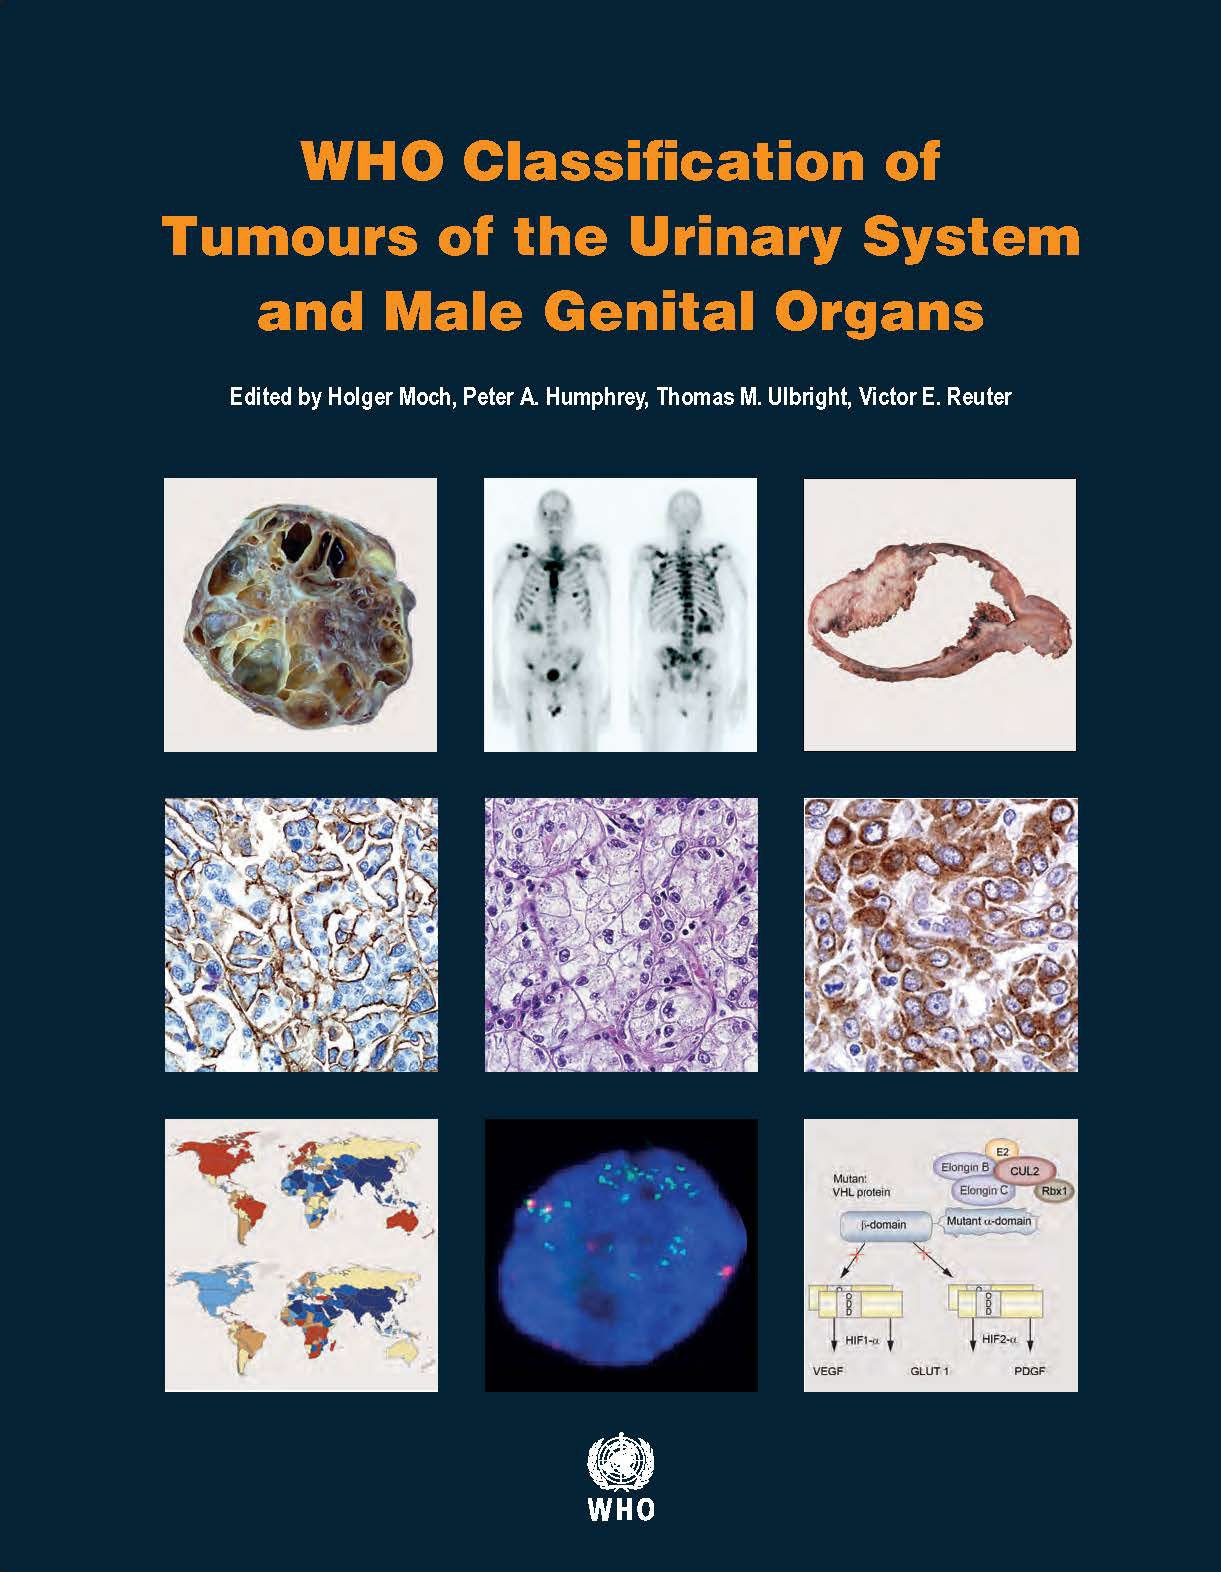 who-classification-of-tumours-of-the-urinary-system-and-male-genital-organs-world-health-organization-who-classification-of-tumours